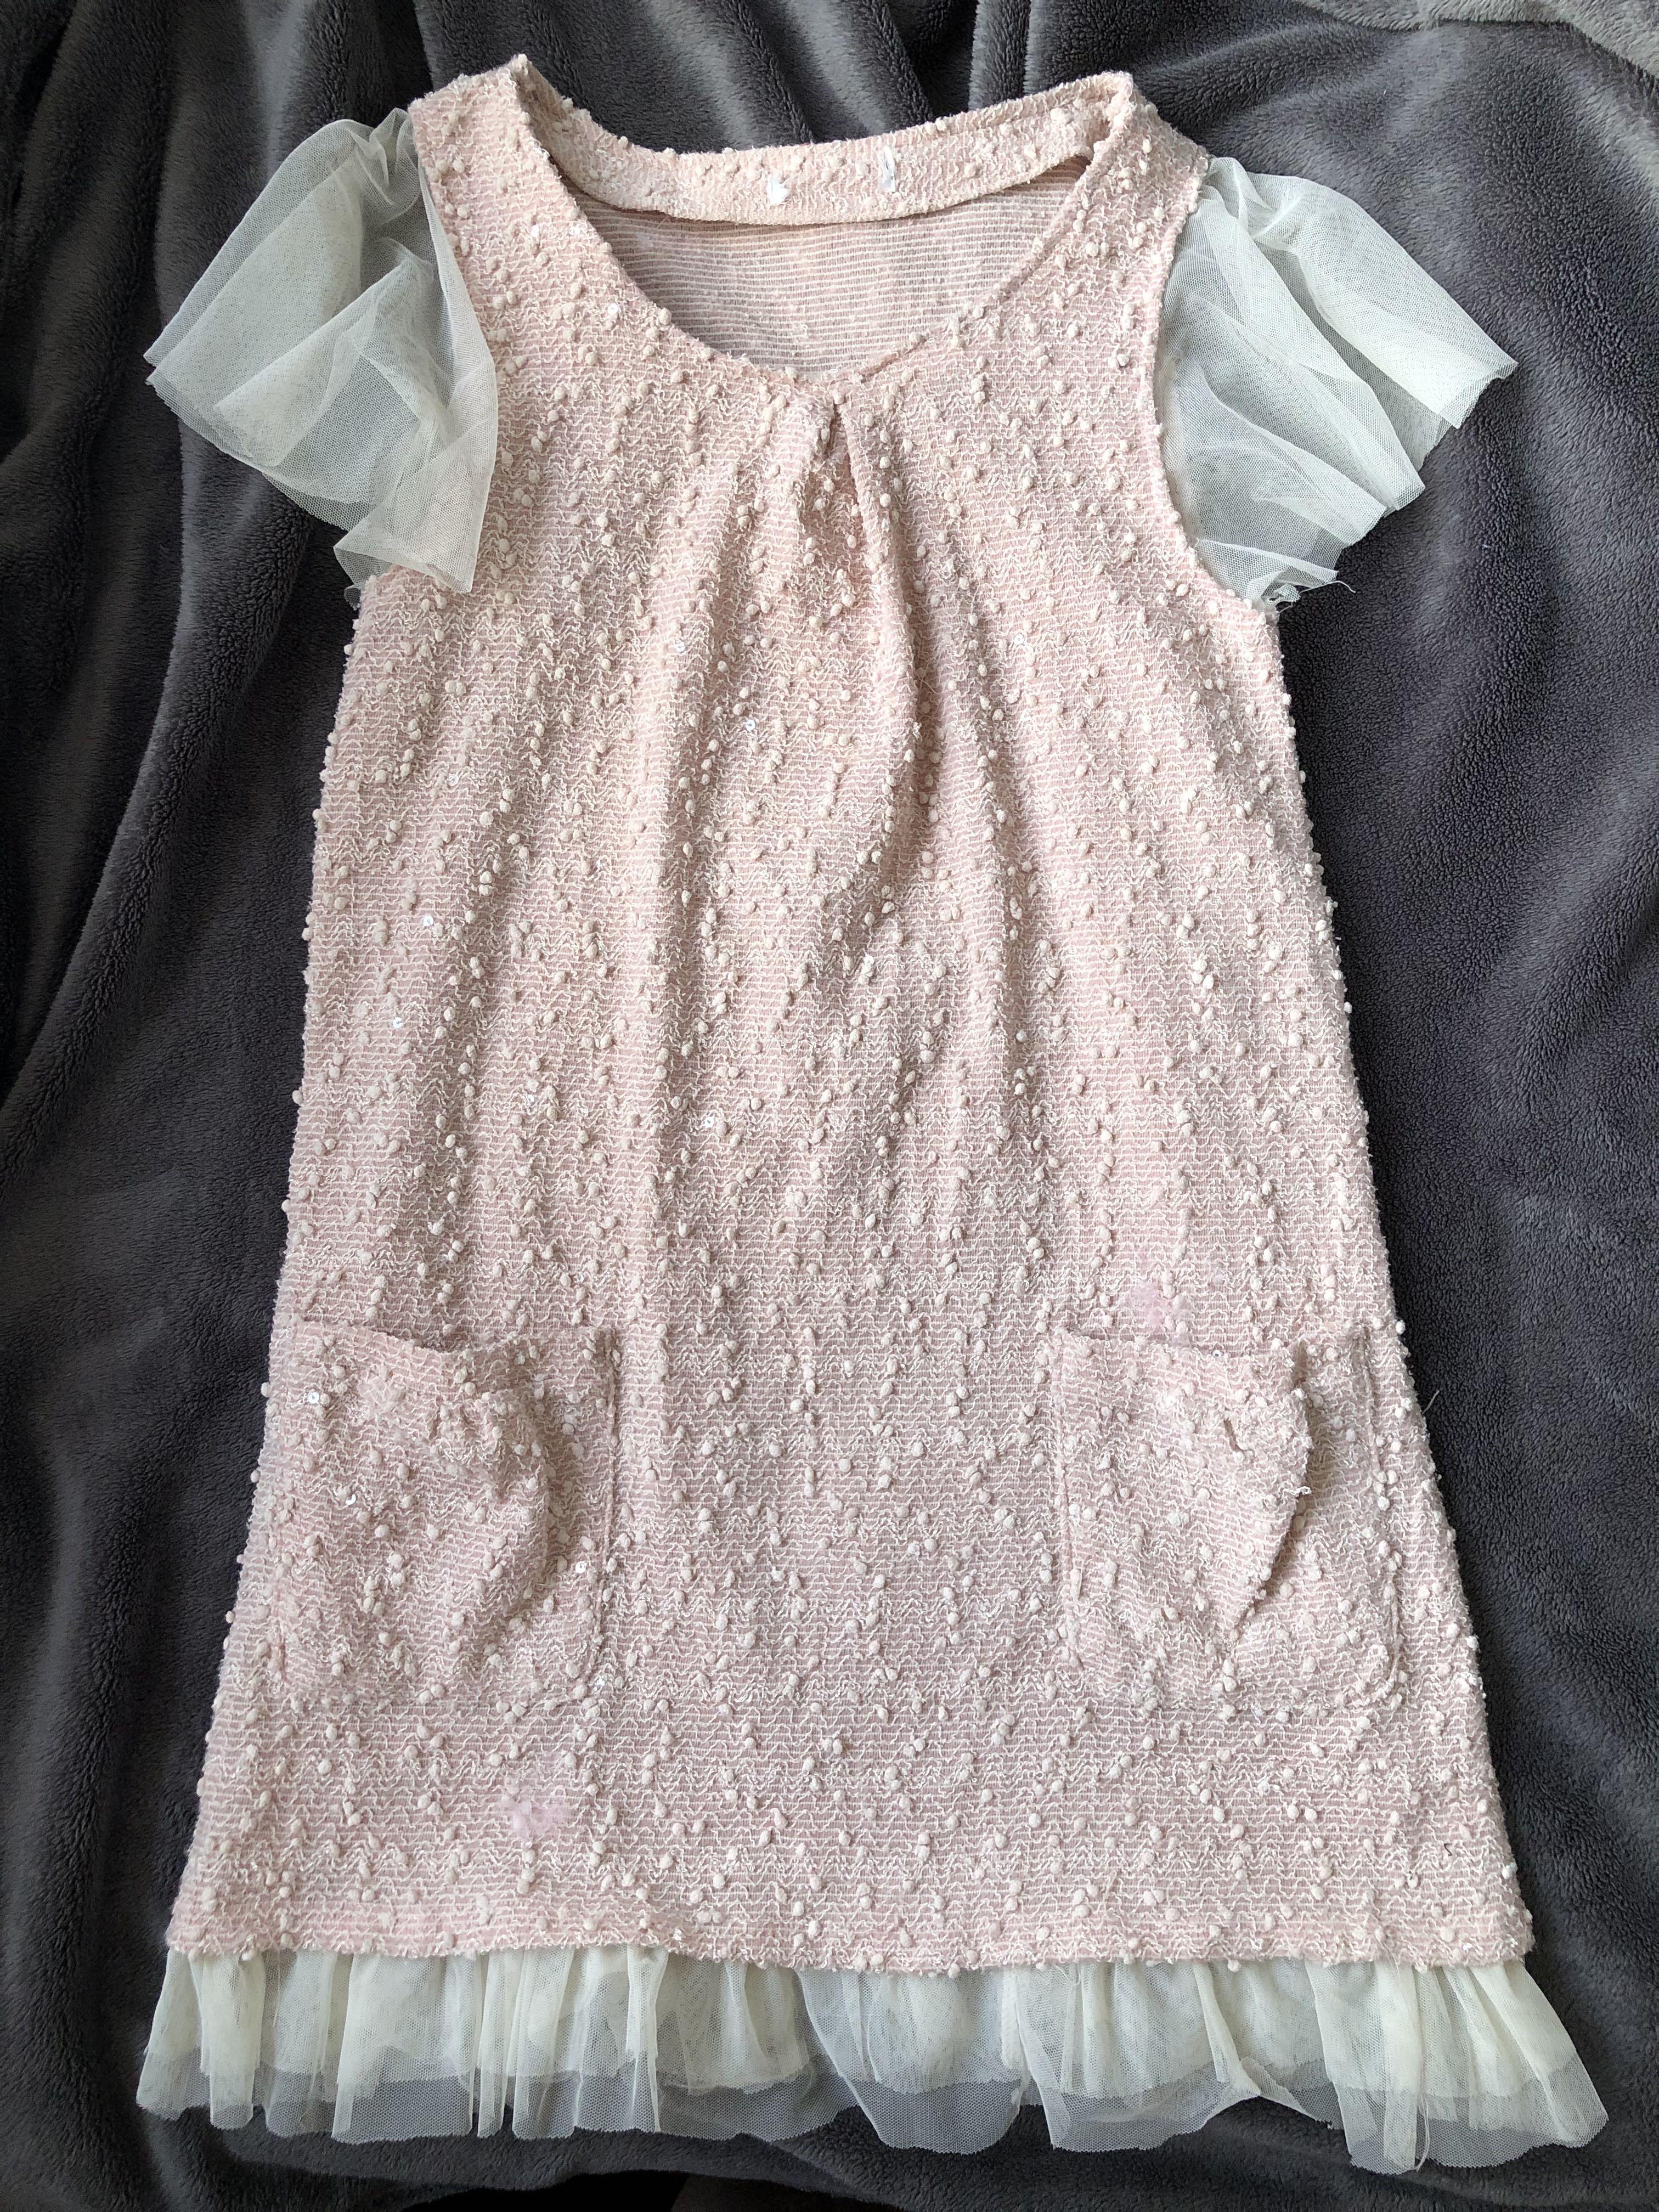 Pink Tweed Lace Casual Dress with Pockets Thrifted Vintage Cottage core  fairy core y2k 80s 90s, Women's Fashion, Dresses \u0026 Sets, Dresses on  Carousell